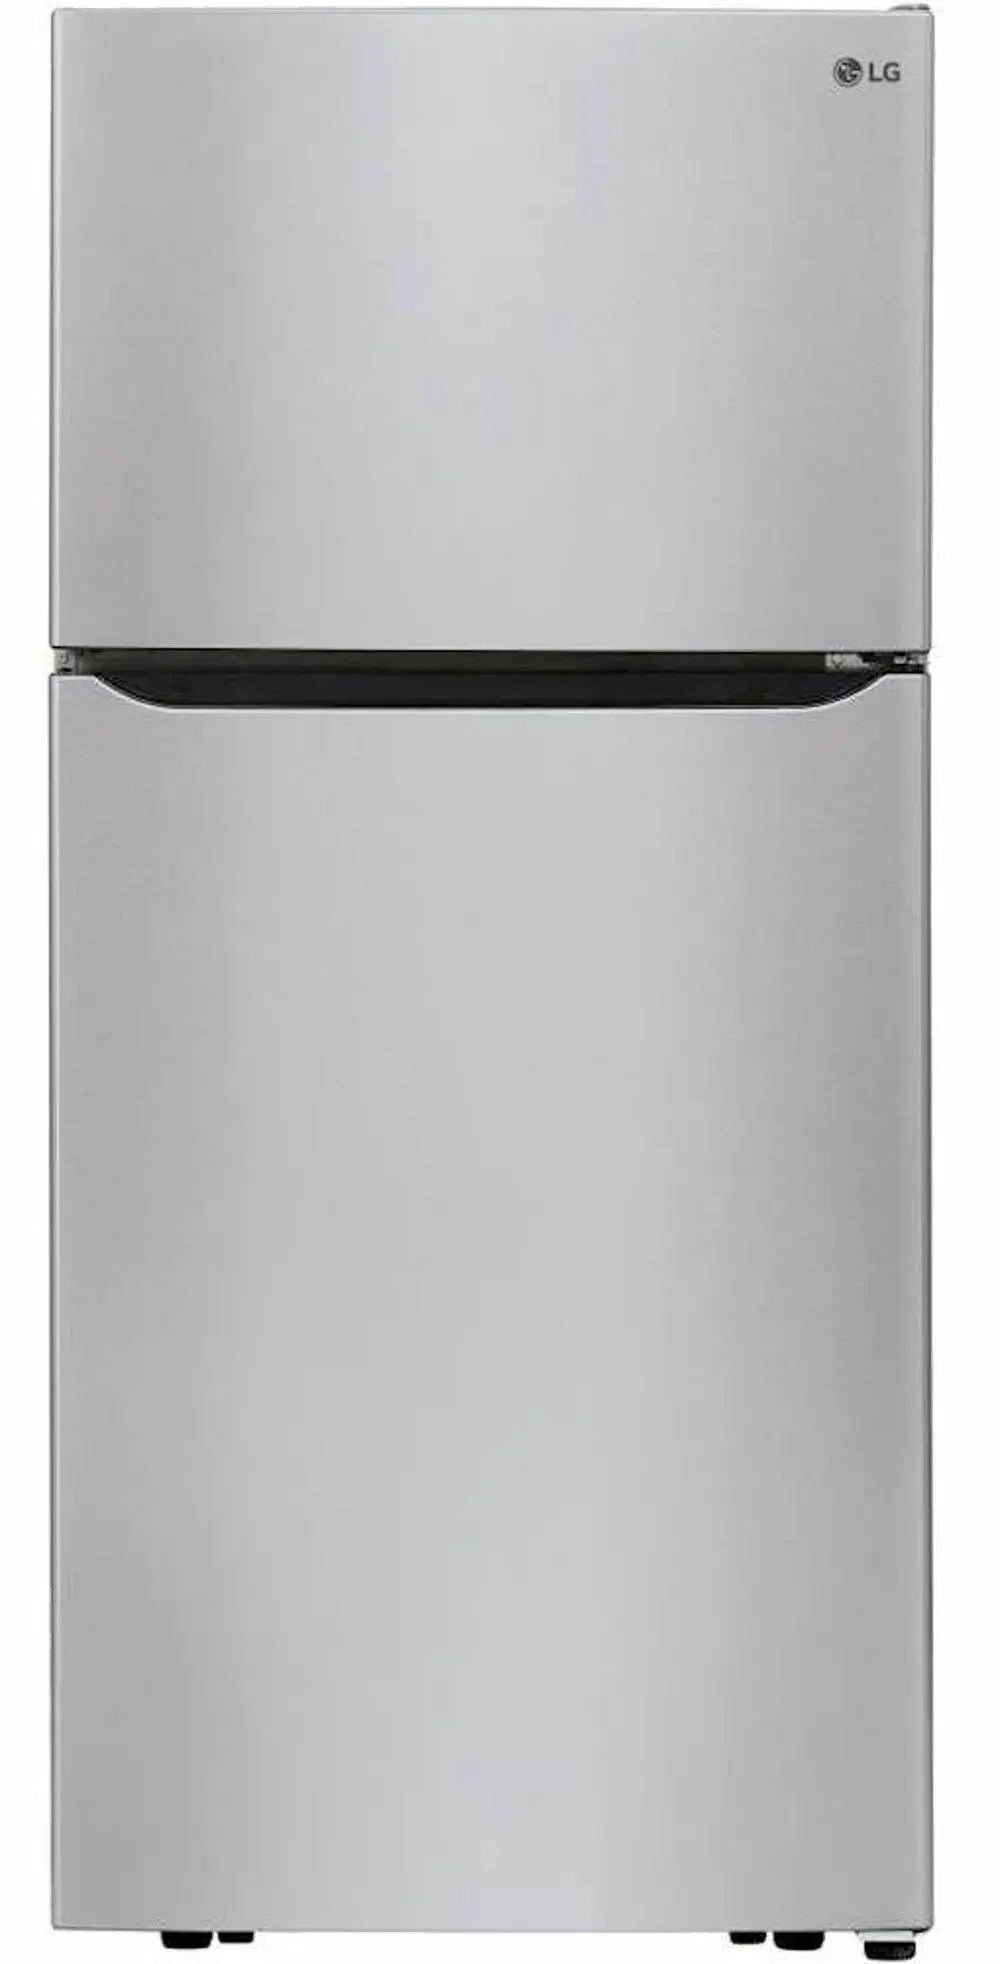 LTCS20120S LG 20.2 cu. ft. Top Freezer Refrigerator - 30 Inch Stainless Steel-1